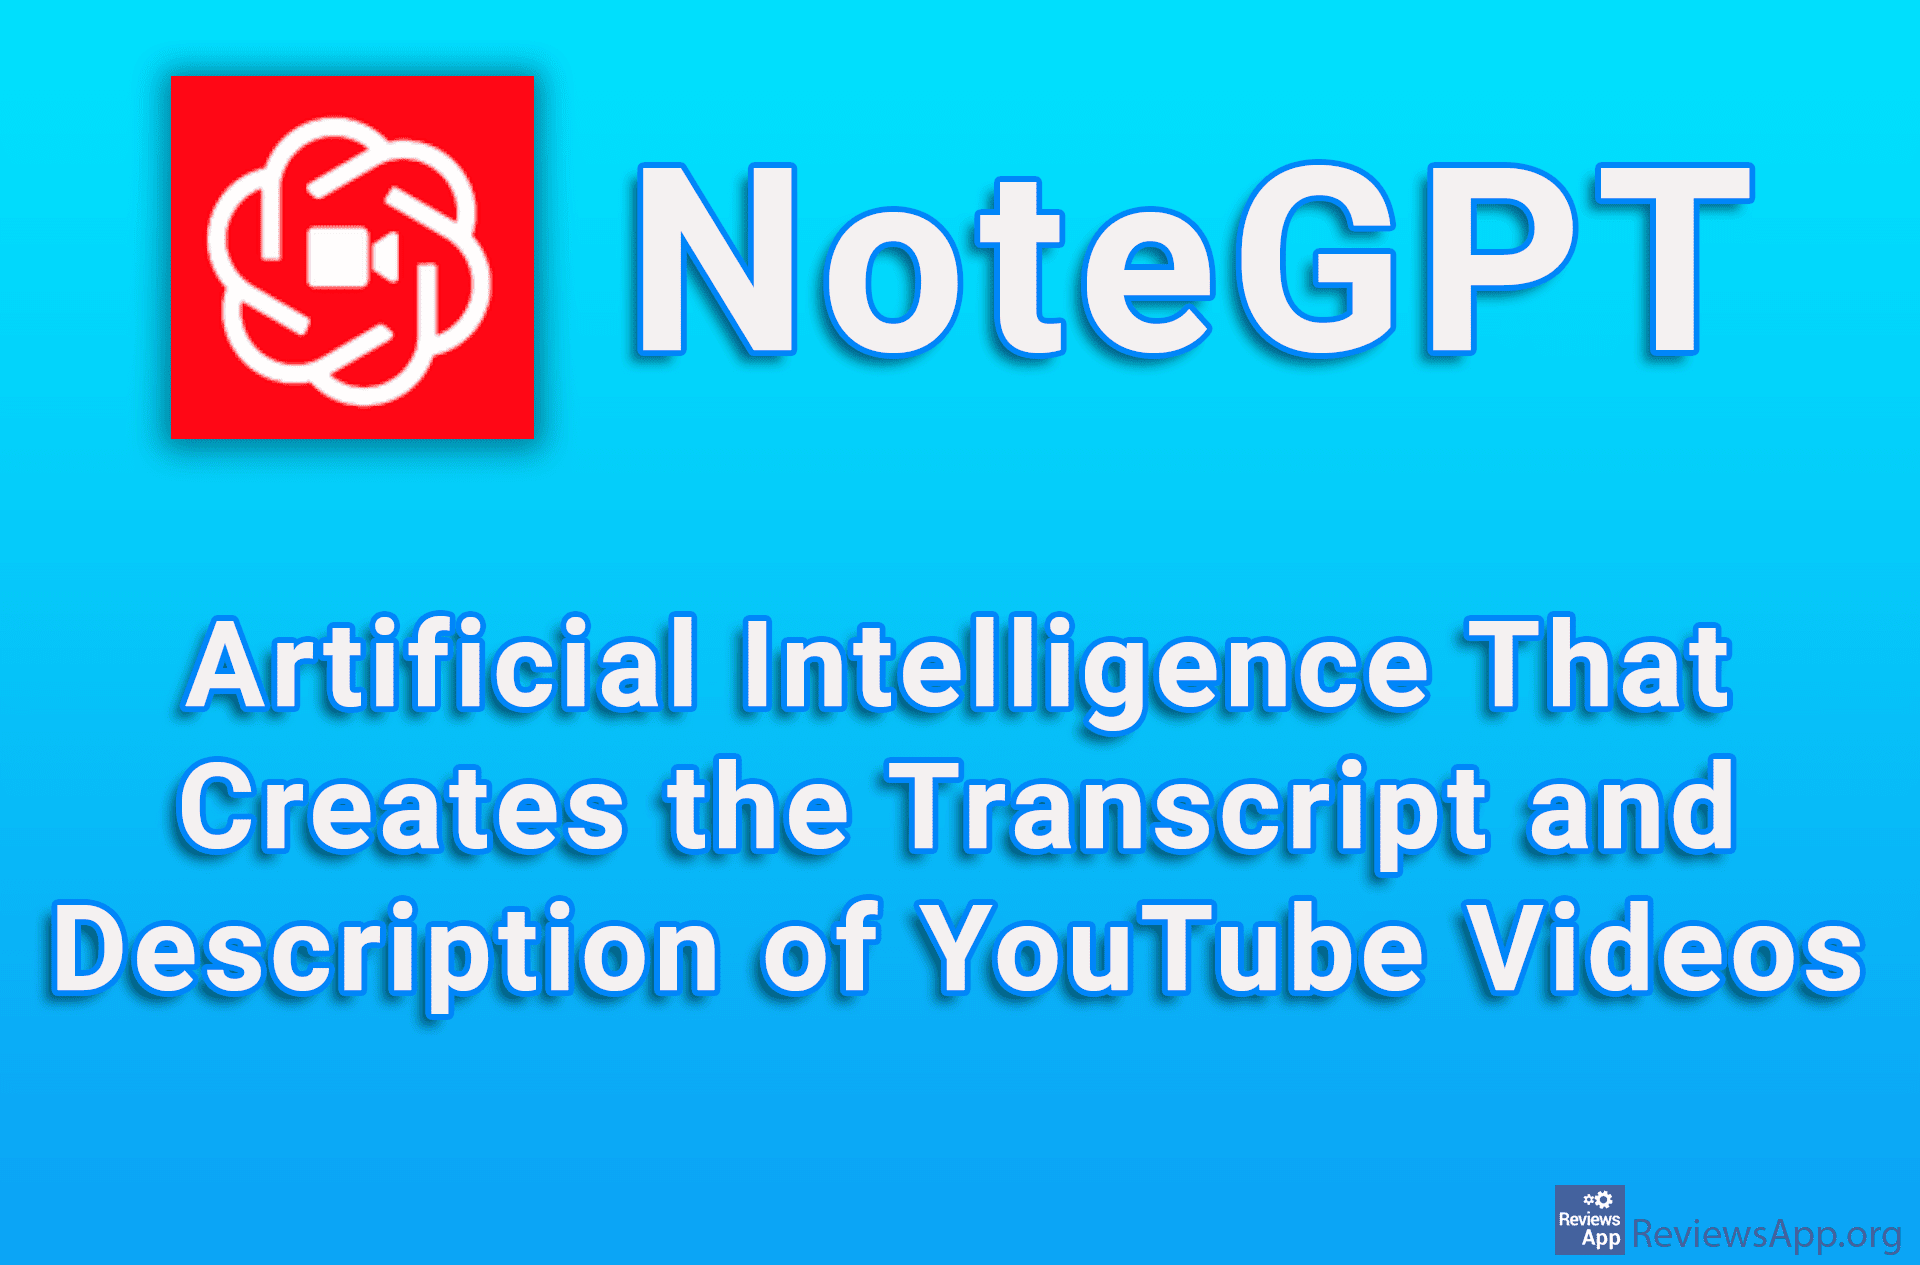 NoteGPT – Artificial Intelligence That Creates the Transcript and Description of YouTube Videos